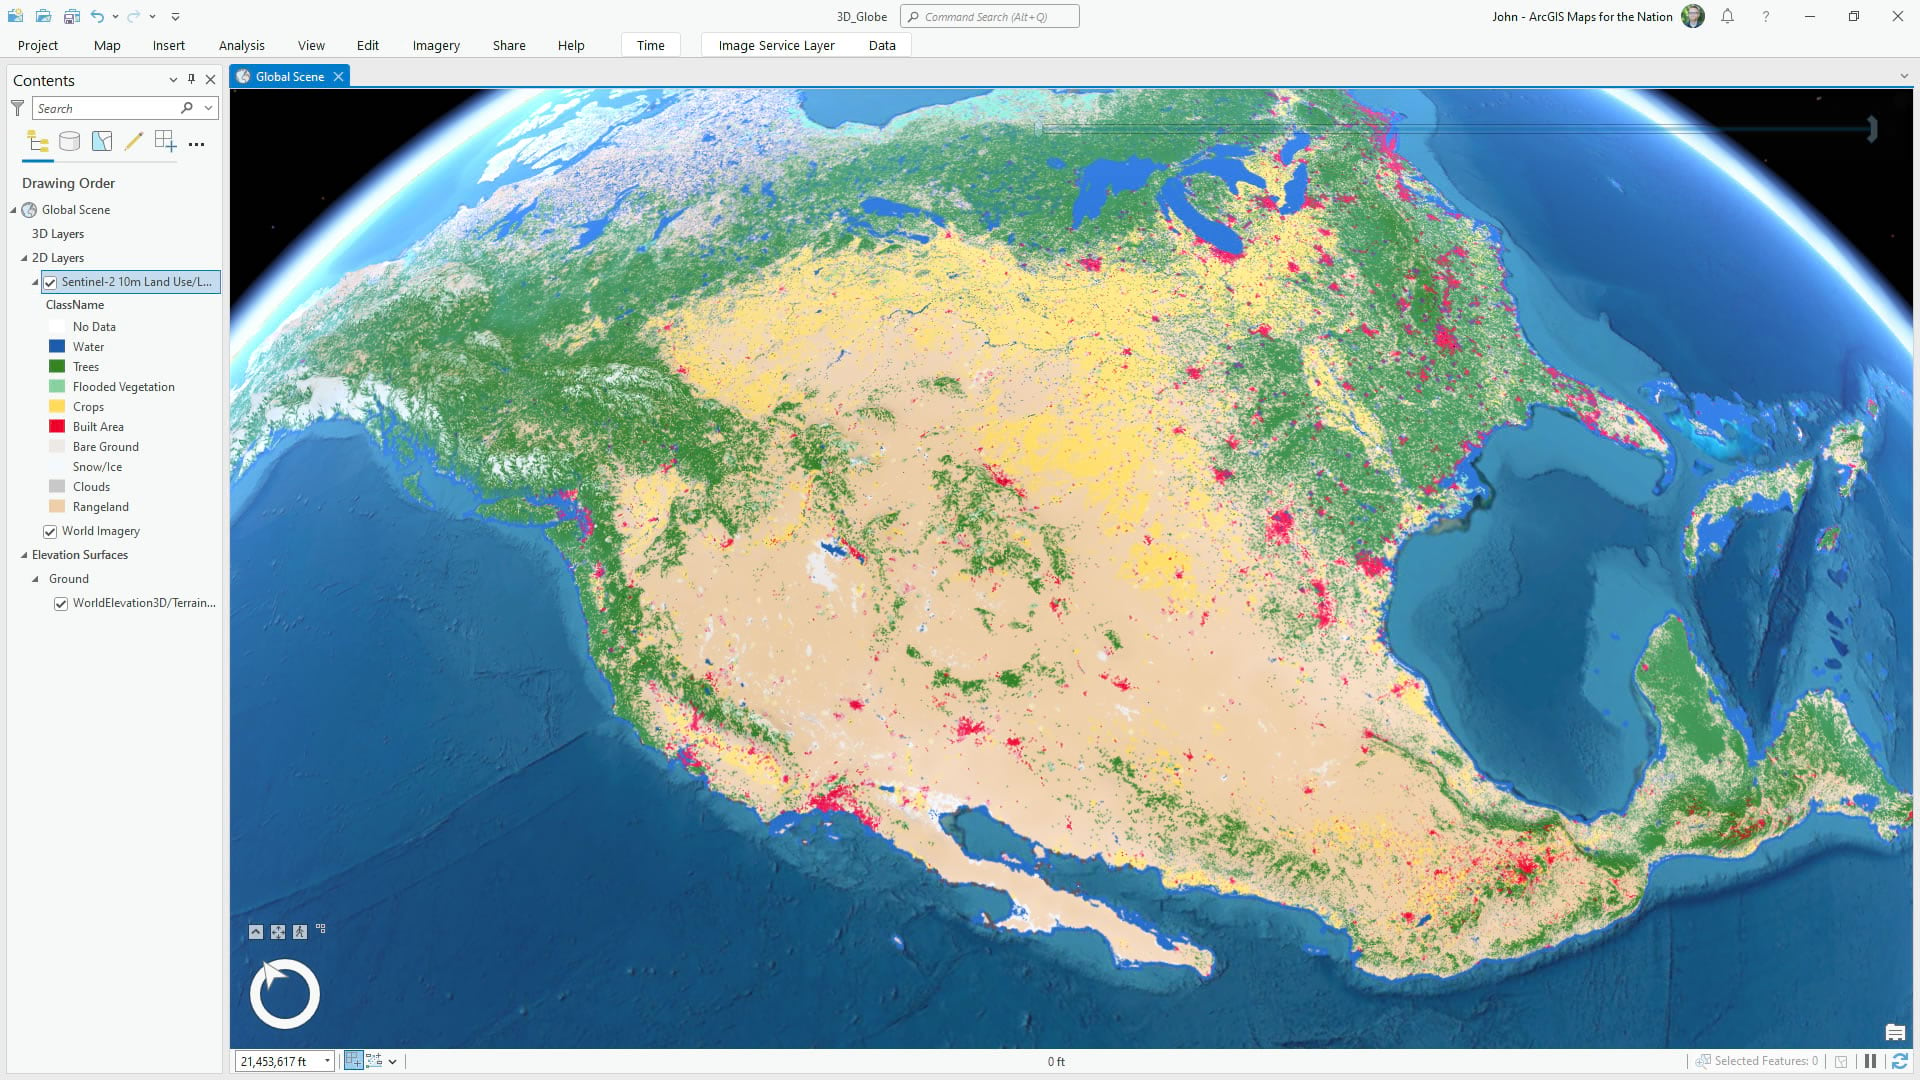 Creating a 3D globe in ArcGIS Pro: Land use imagery on the map